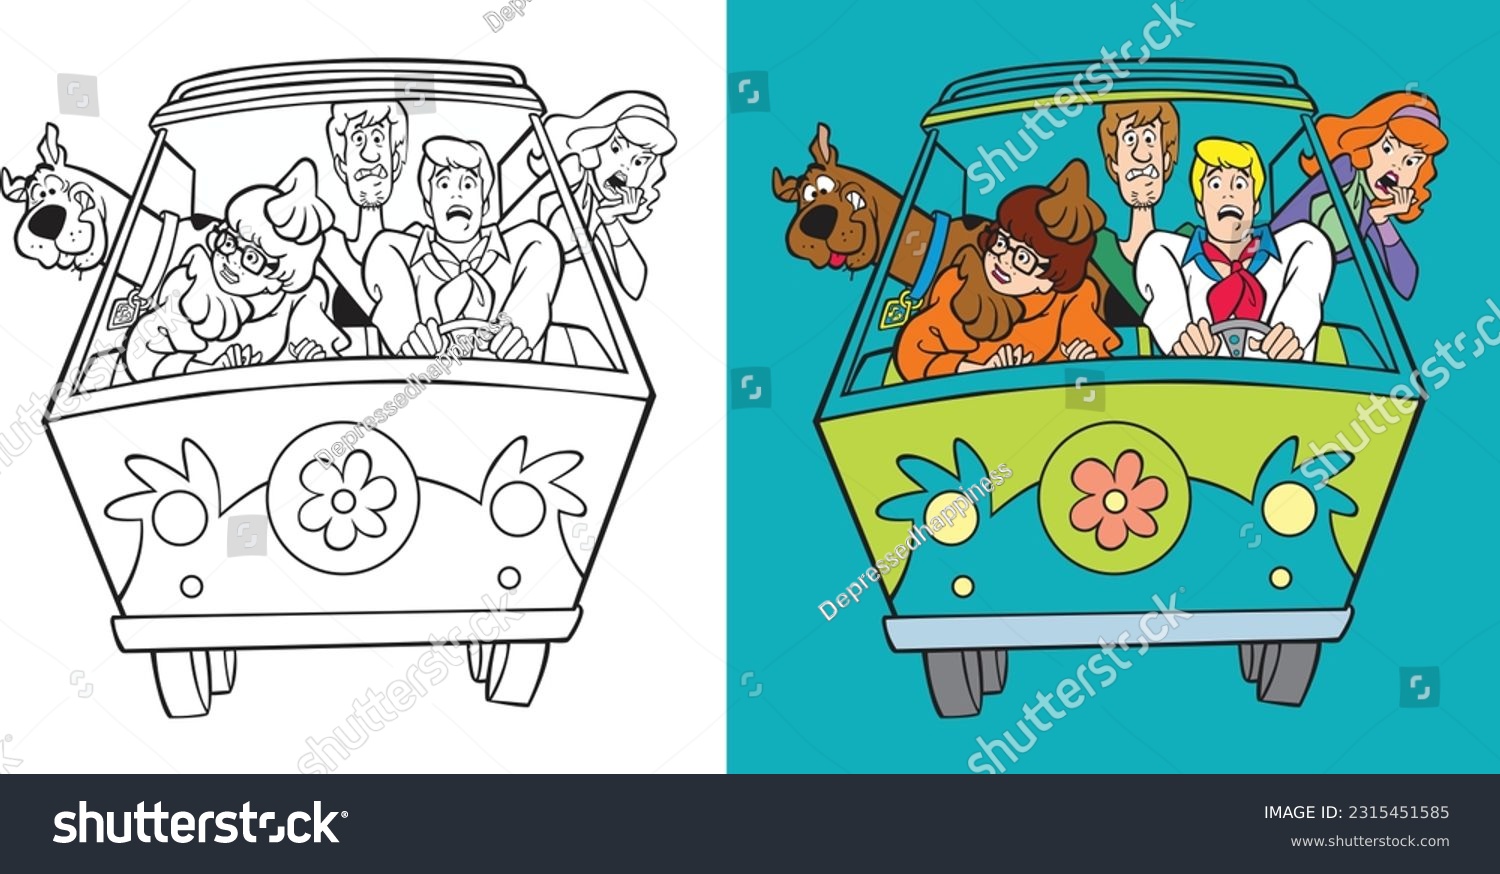 Scooby doo images stock photos d objects vectors